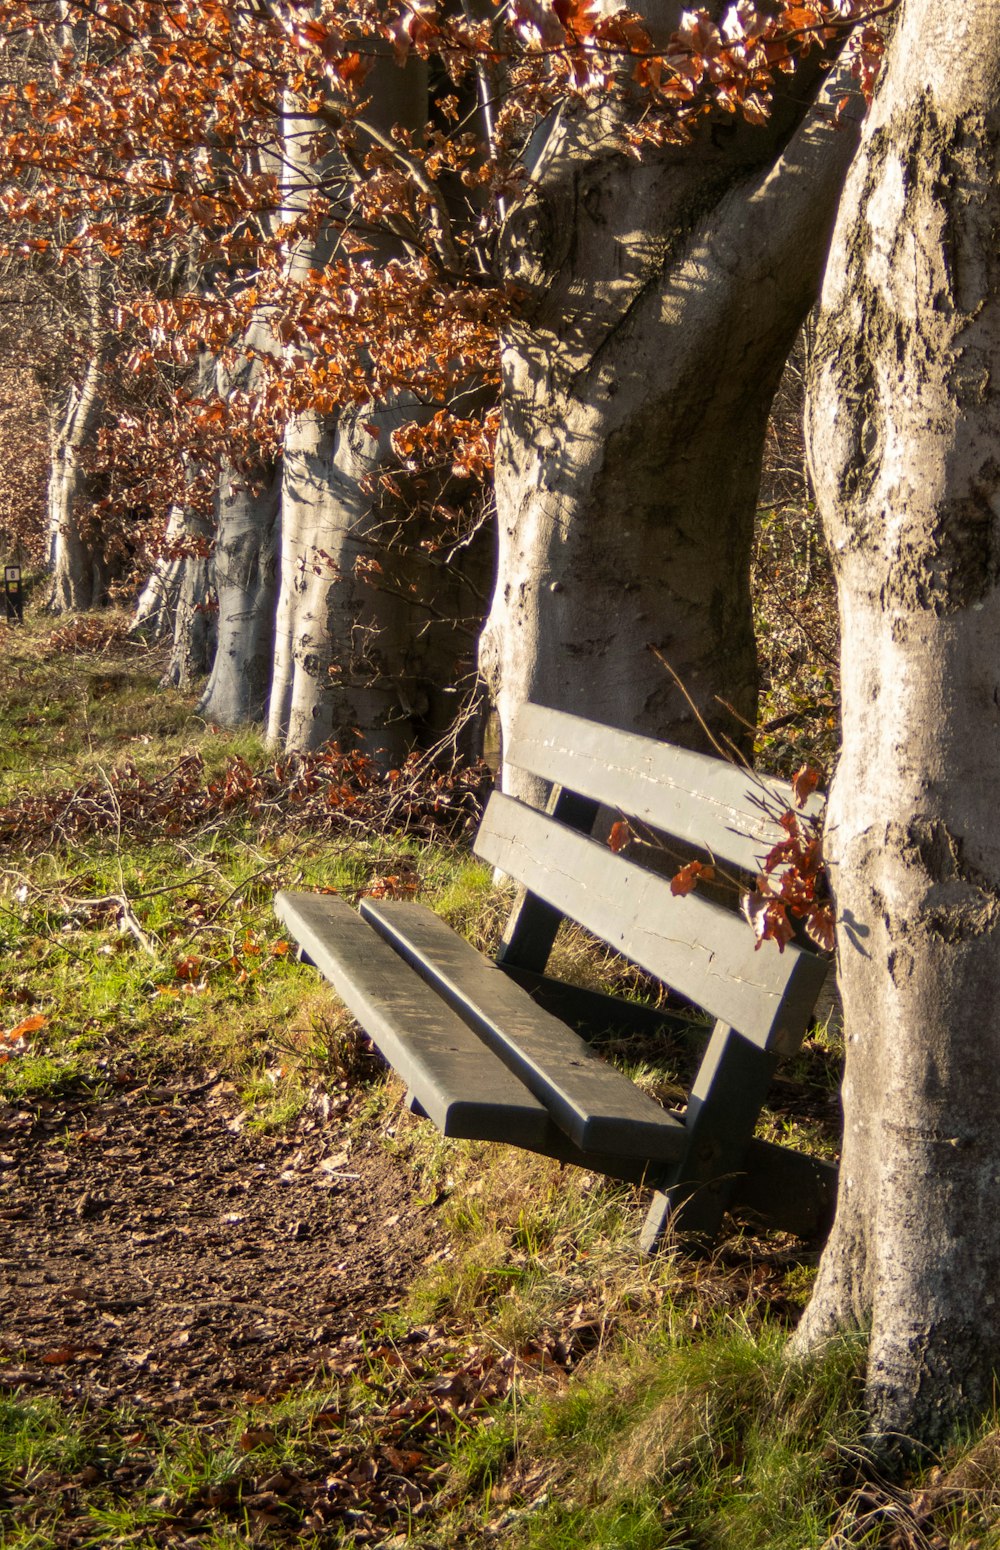 a park bench sitting between two trees in a park